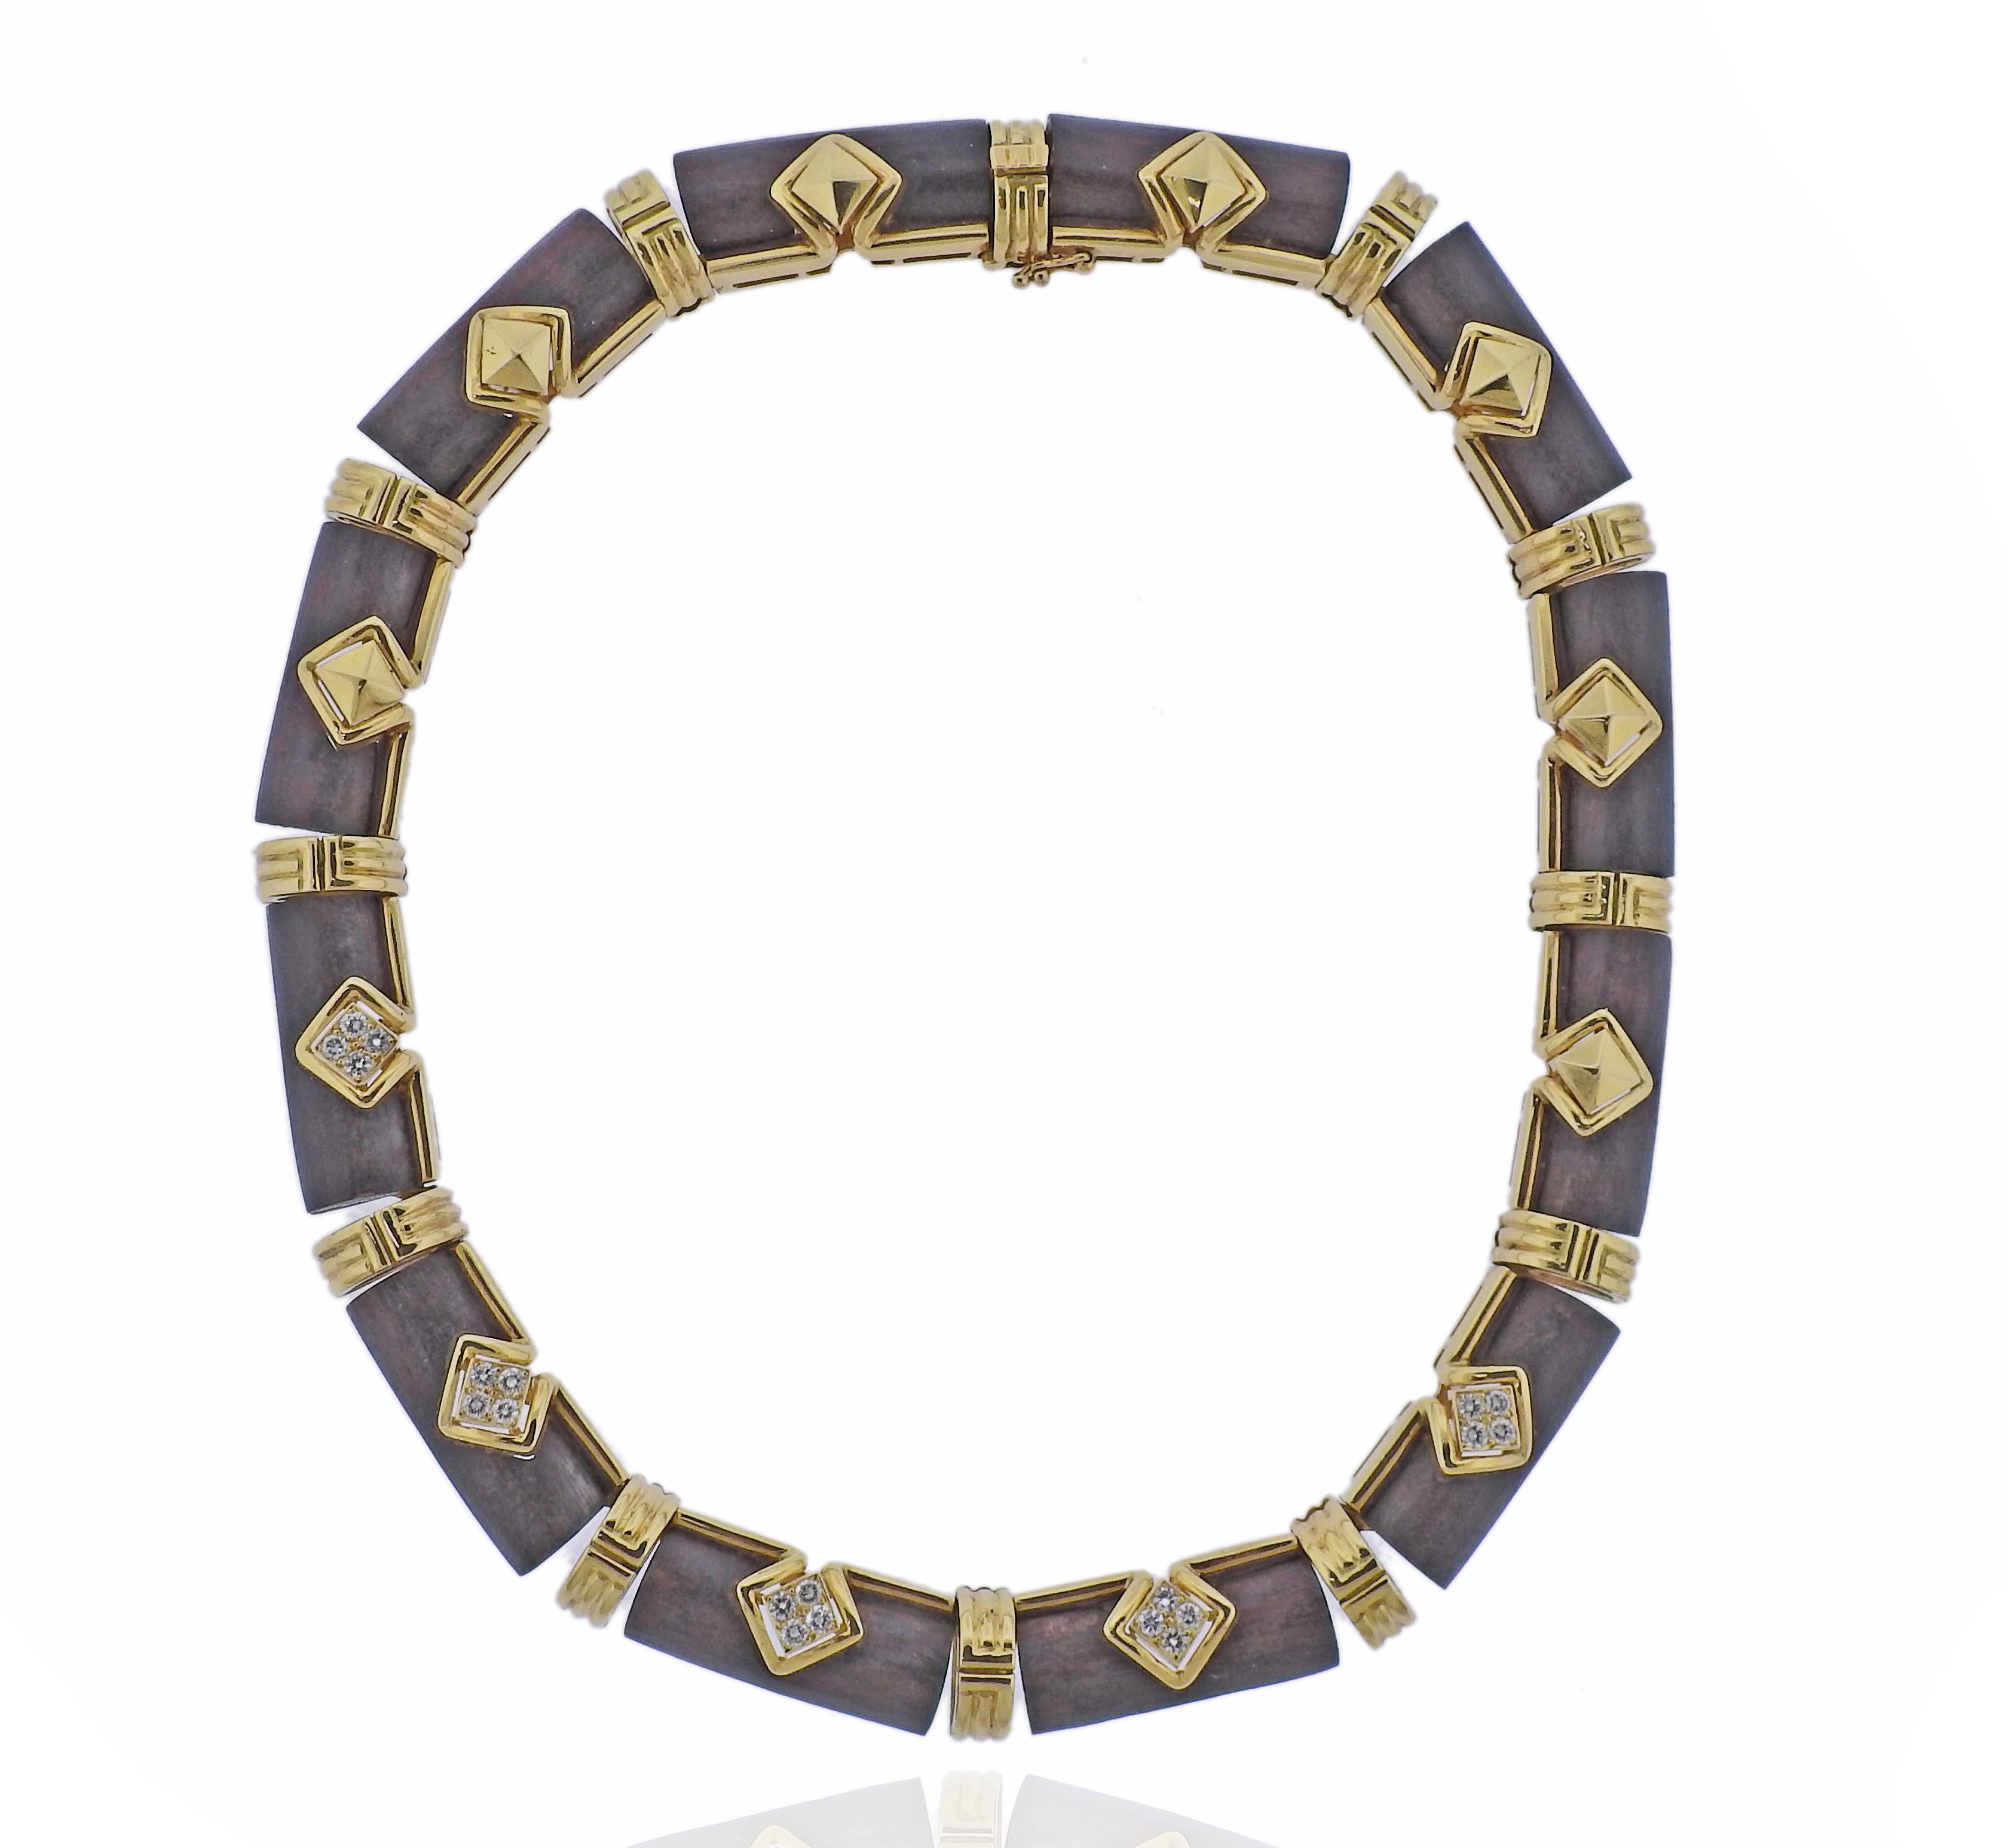 Exquisite 18k gold Boucheron necklace with wood and approx. 1.00ctw G/VS diamonds. Necklace is 14.5